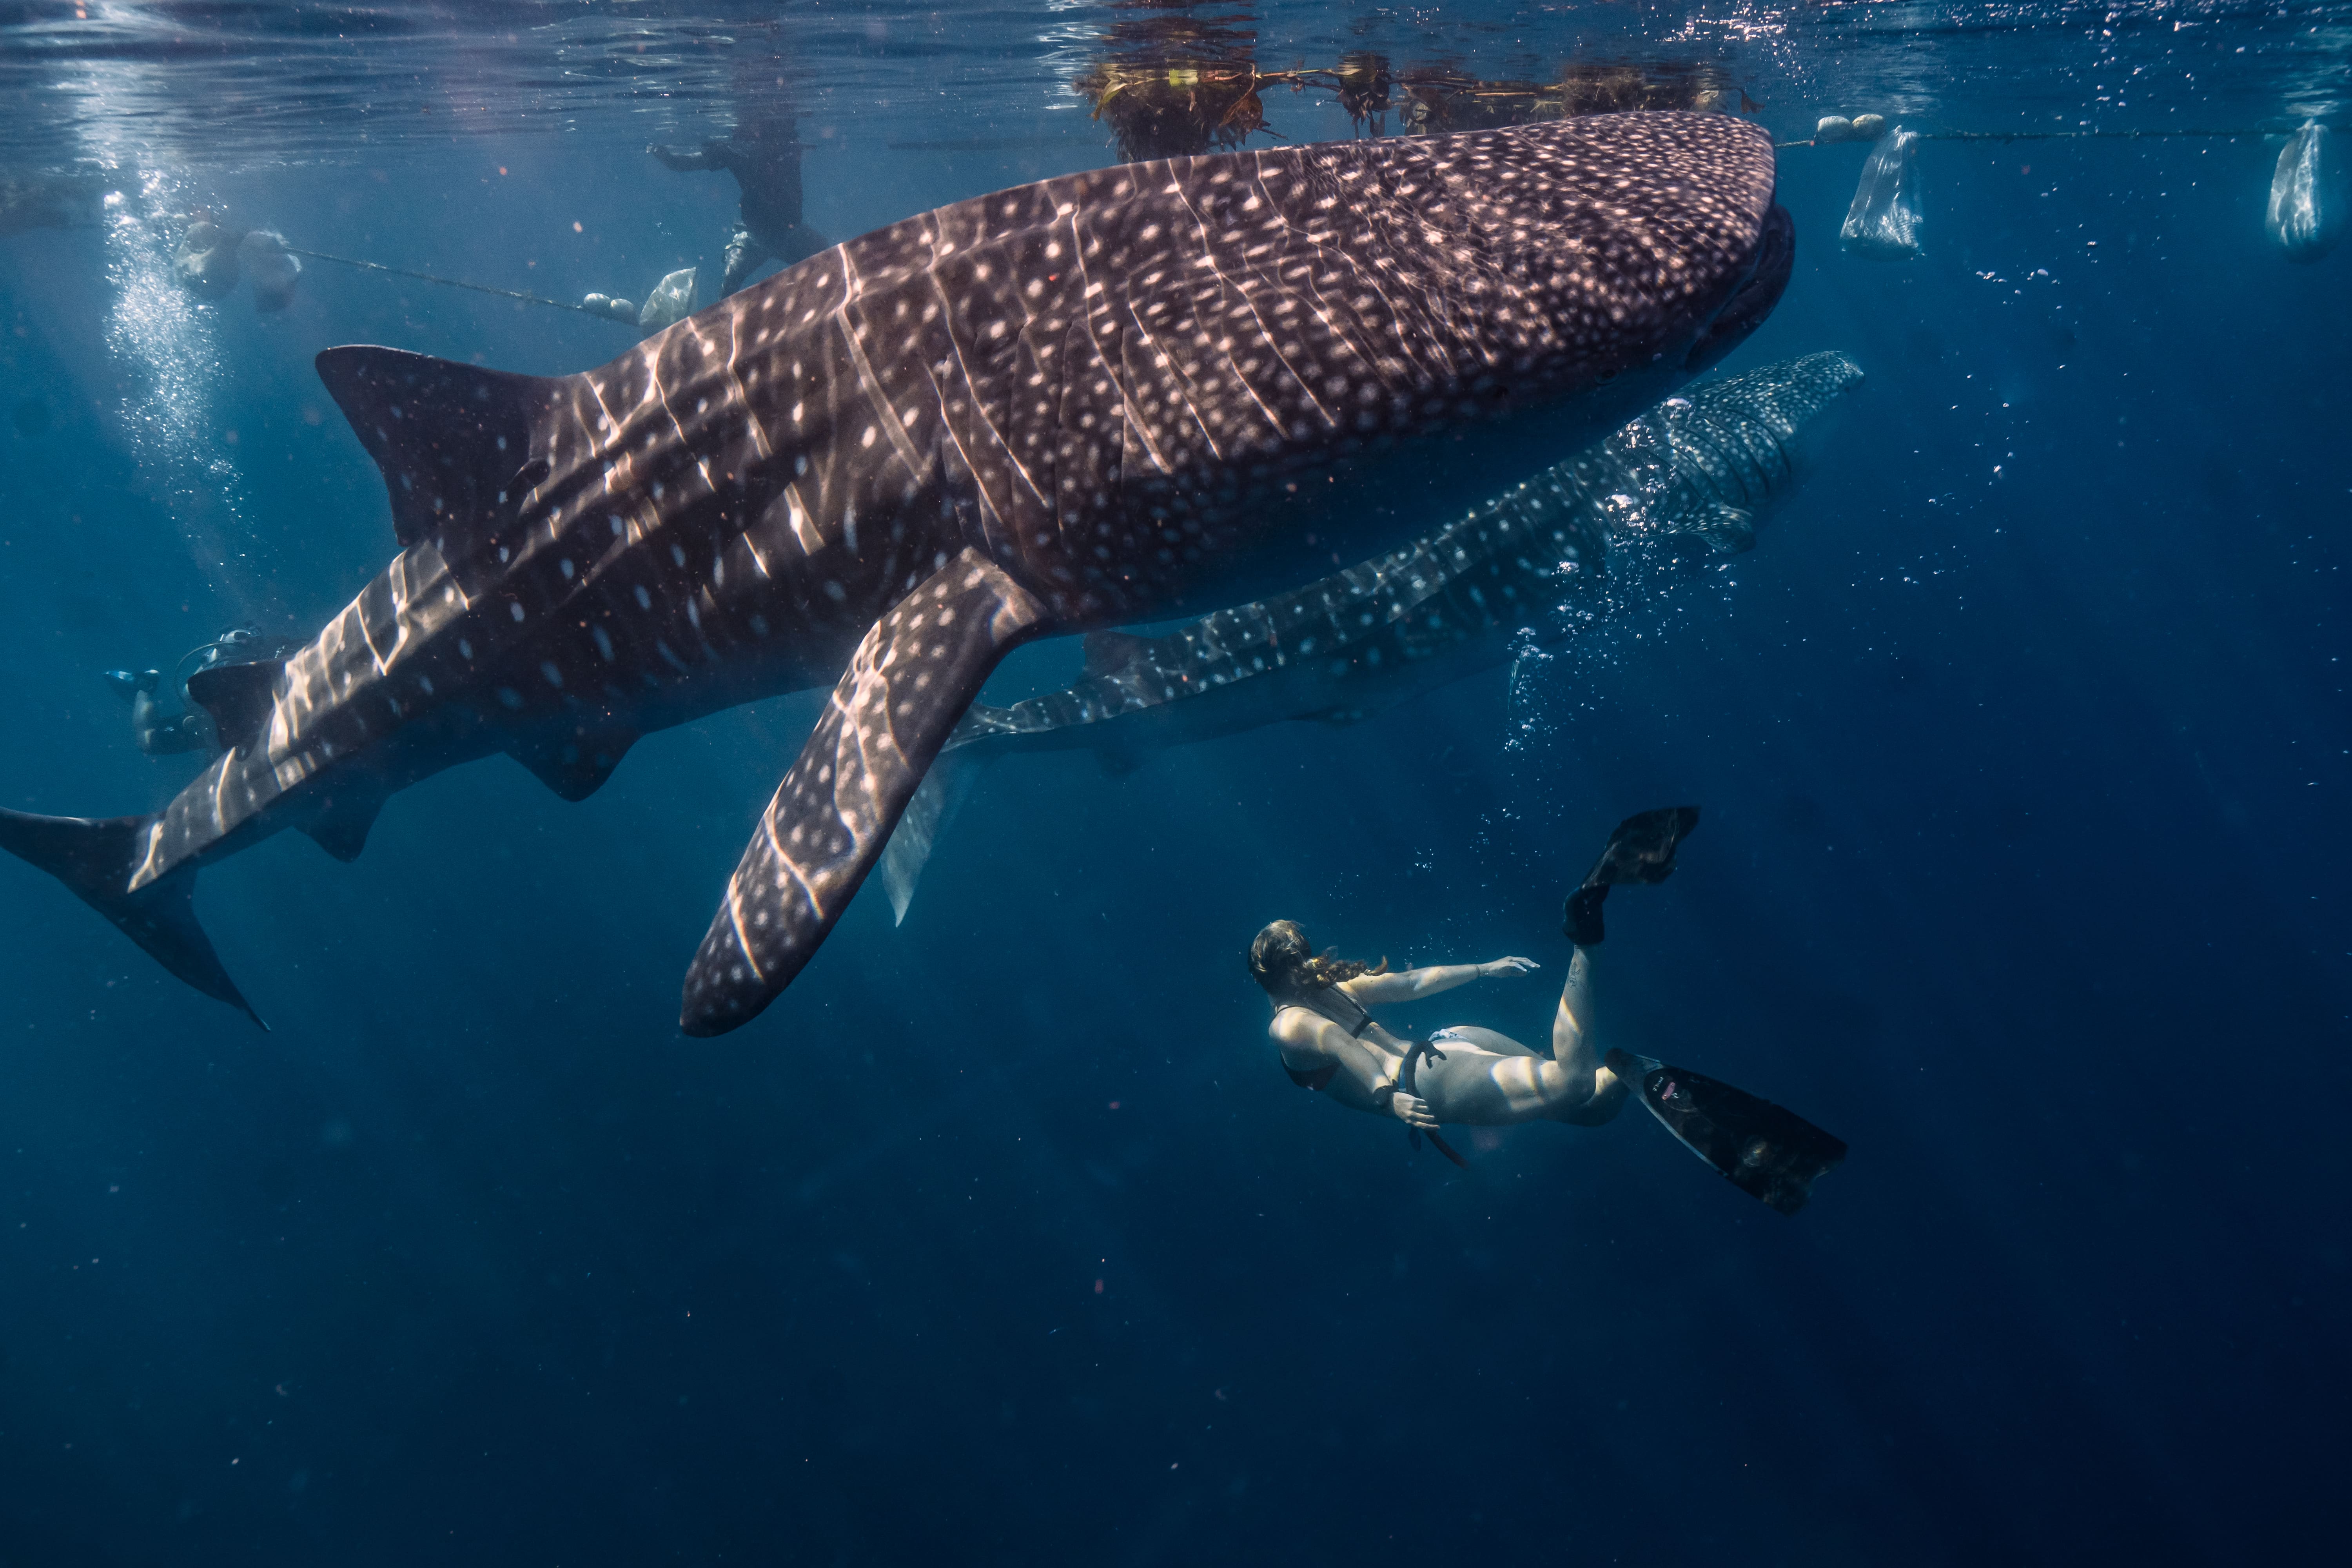 A diver encounters a majestic whale shark in the tranquil depths of the ocean, showcasing the serene beauty and scale of underwater life.